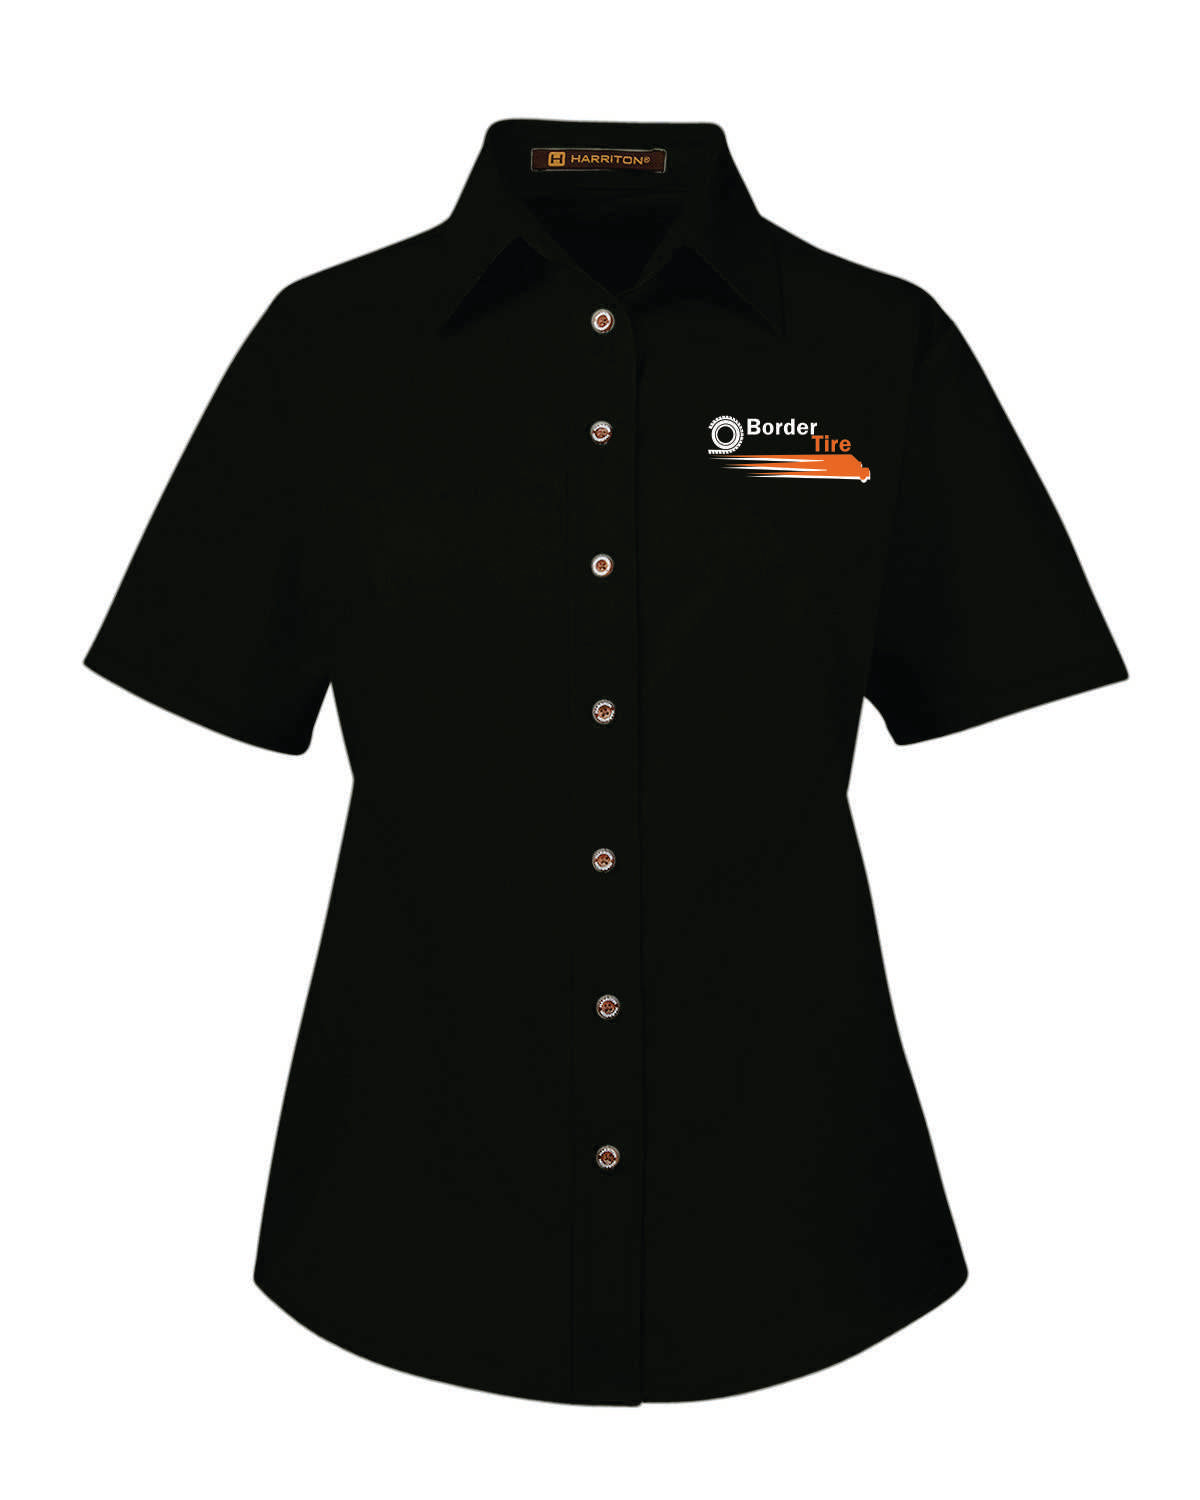 Border Tire Ladies' Easy Blend™ Short-Sleeve Twill Shirt with Stain-Release